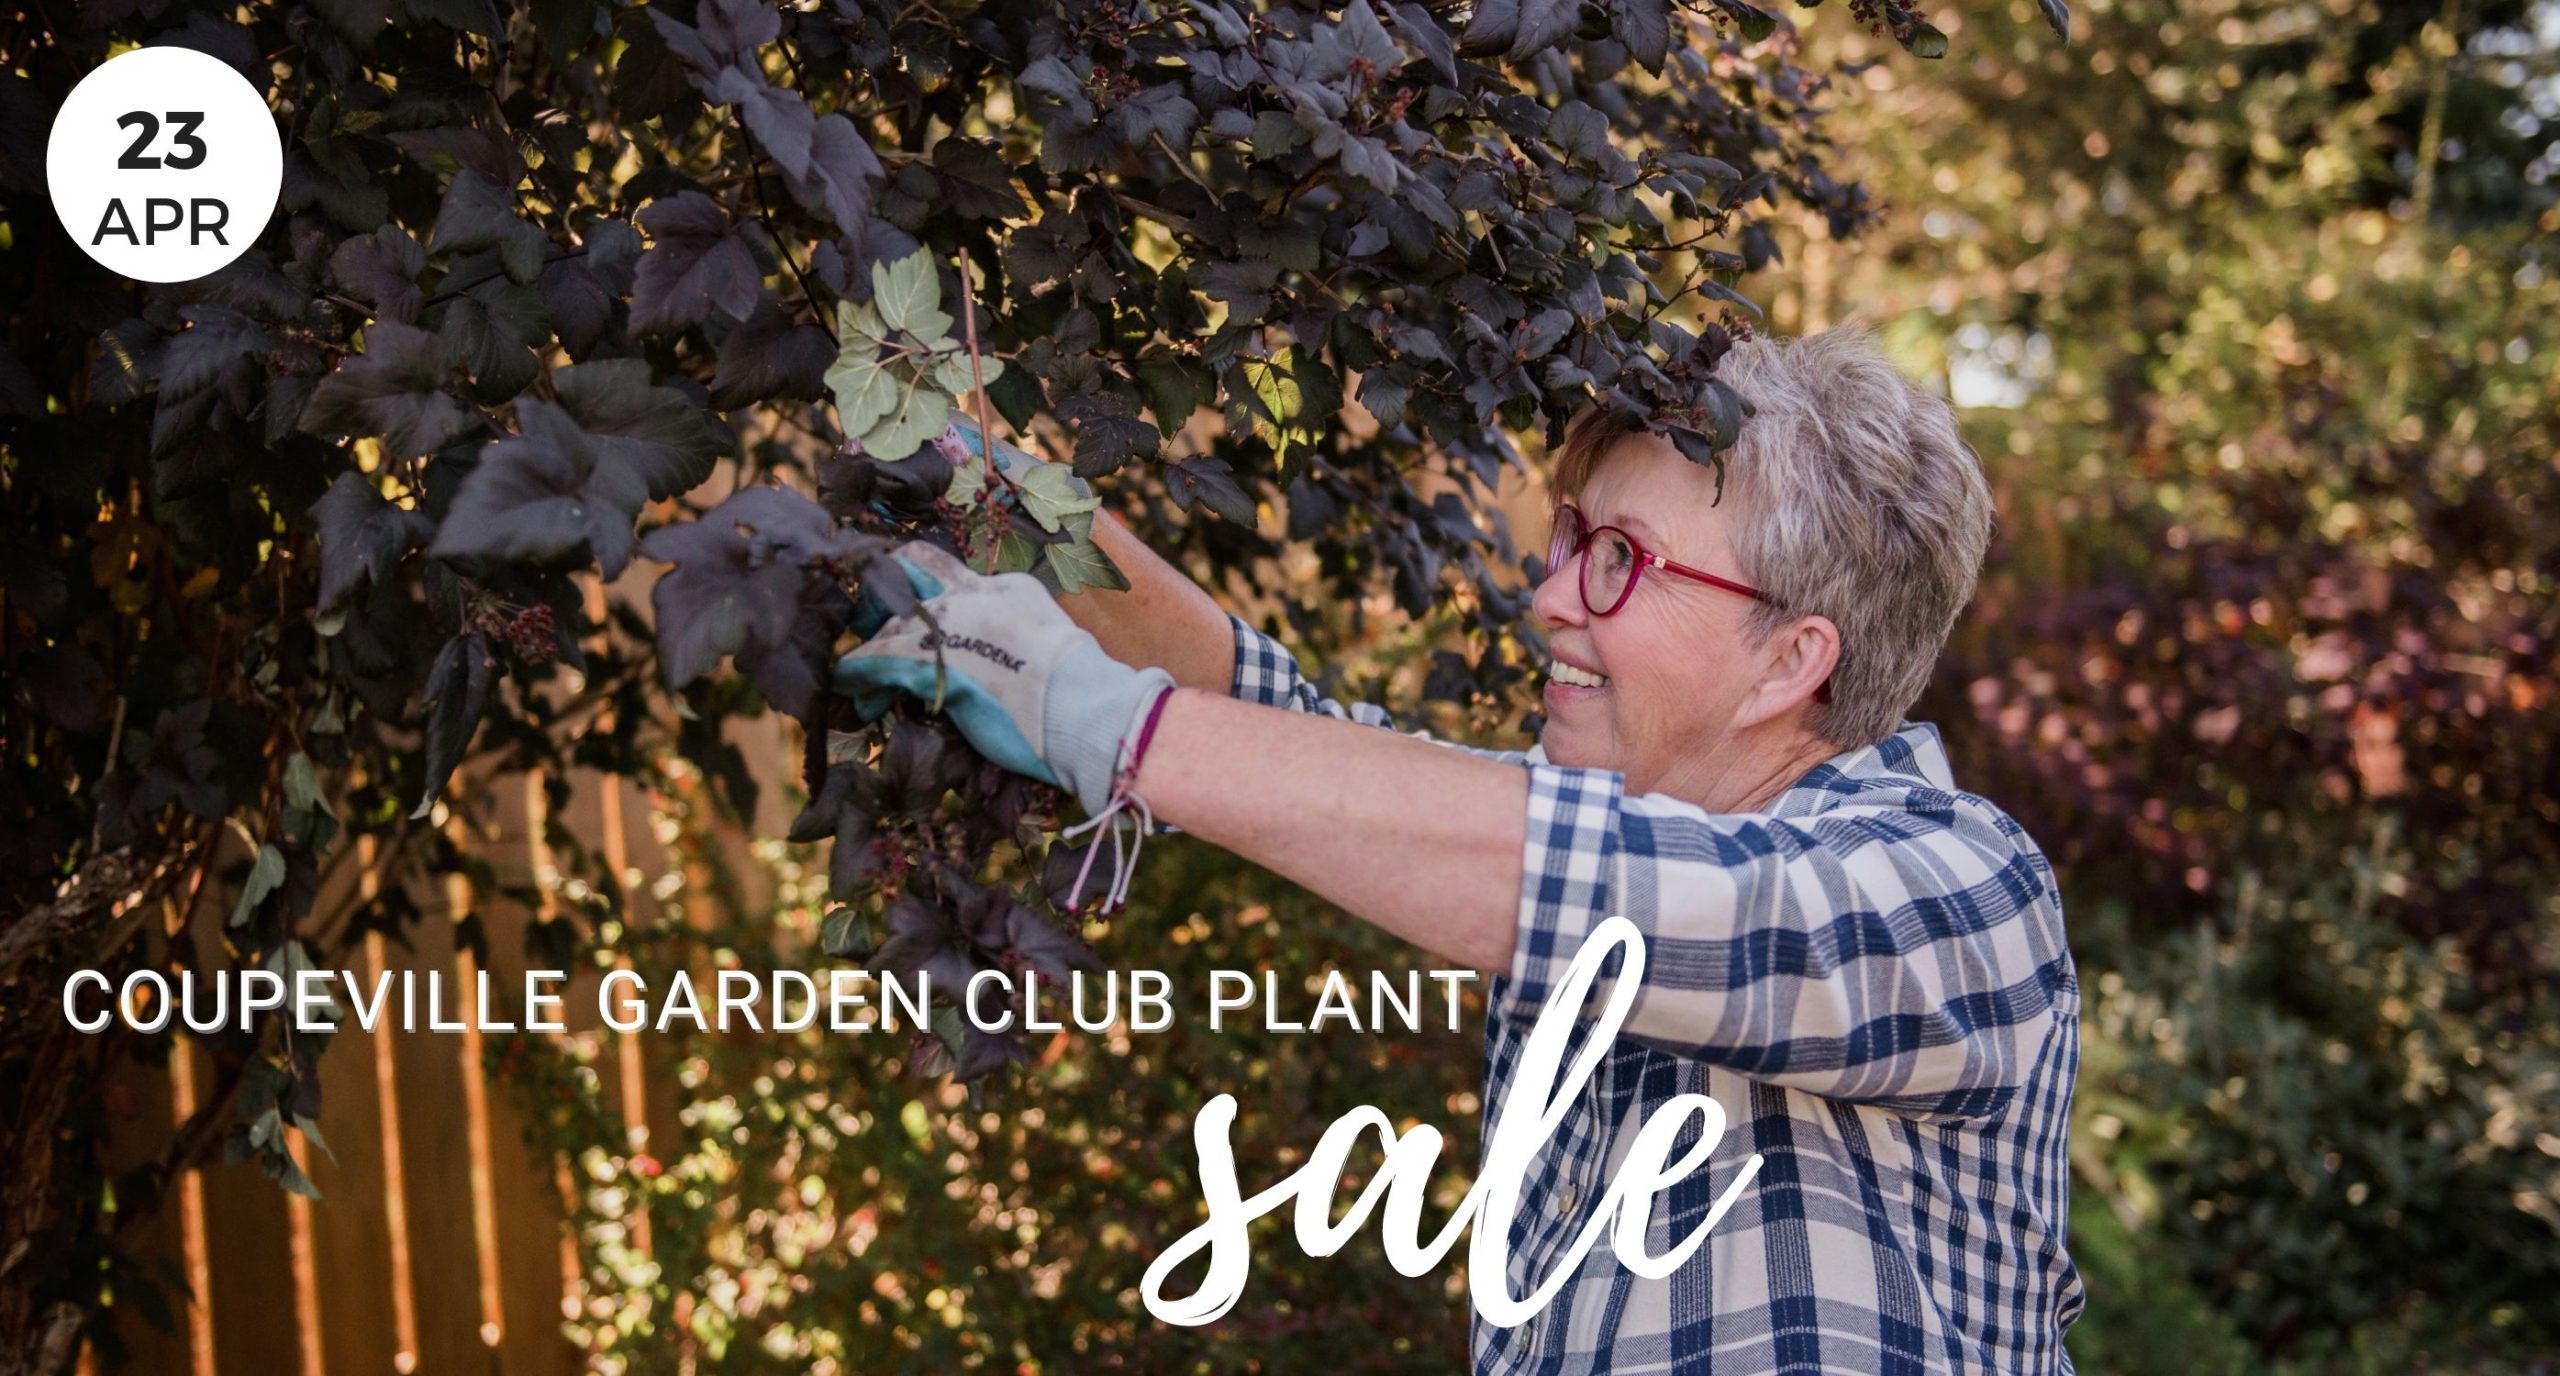 April Events, Coupeville, Garden Club, Whidbey Island, Washington, Local Event, plants